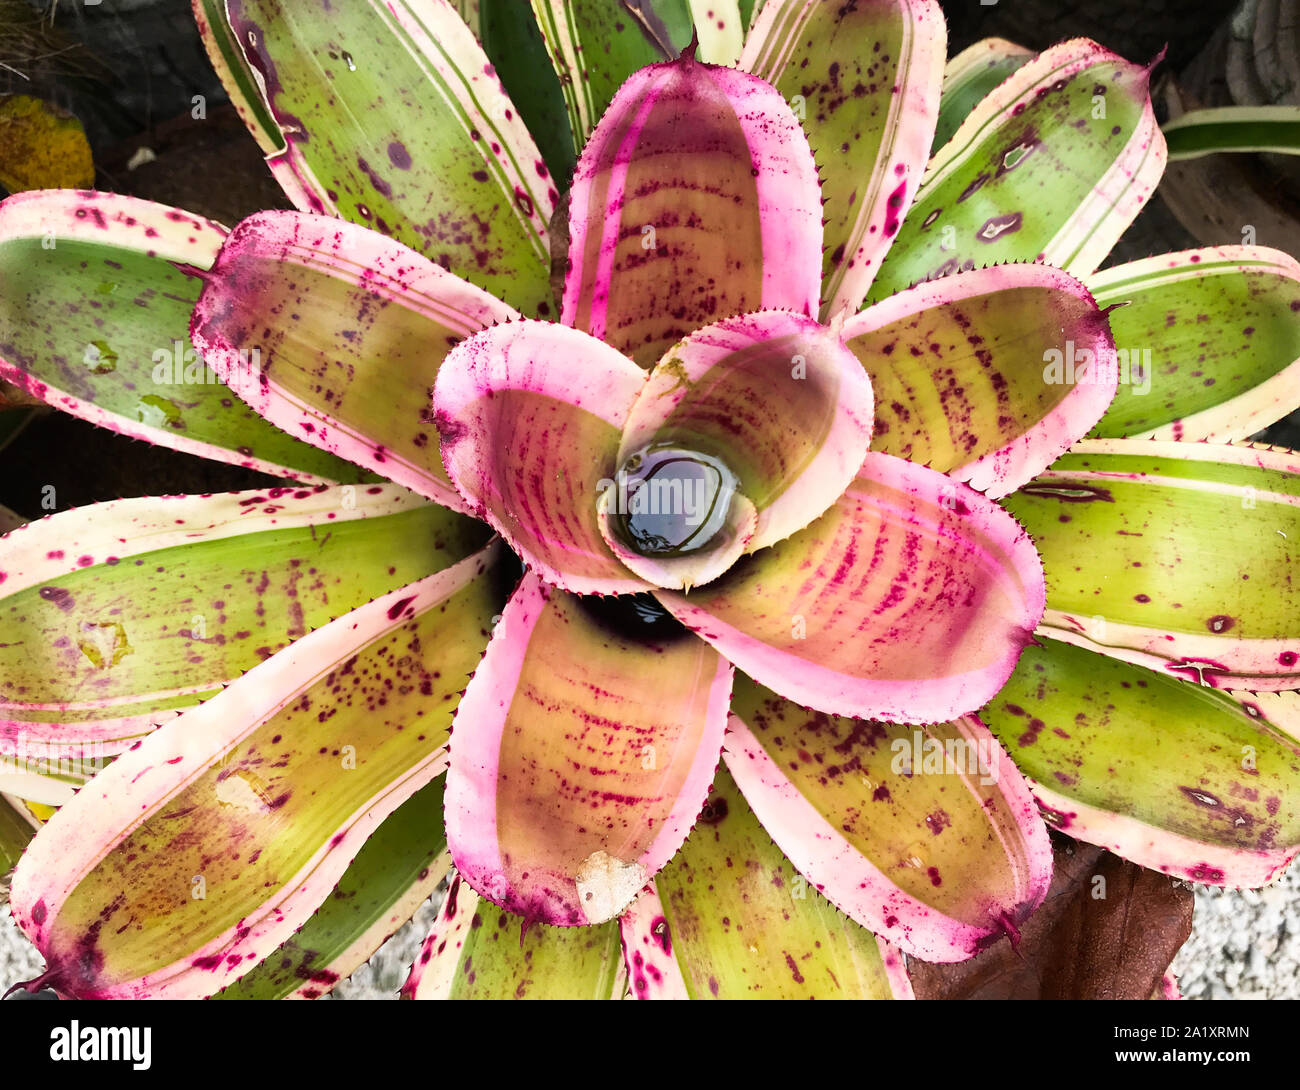 A pink and green tropical succulent plant with spines and a pool of water collecting in it; background Stock Photo